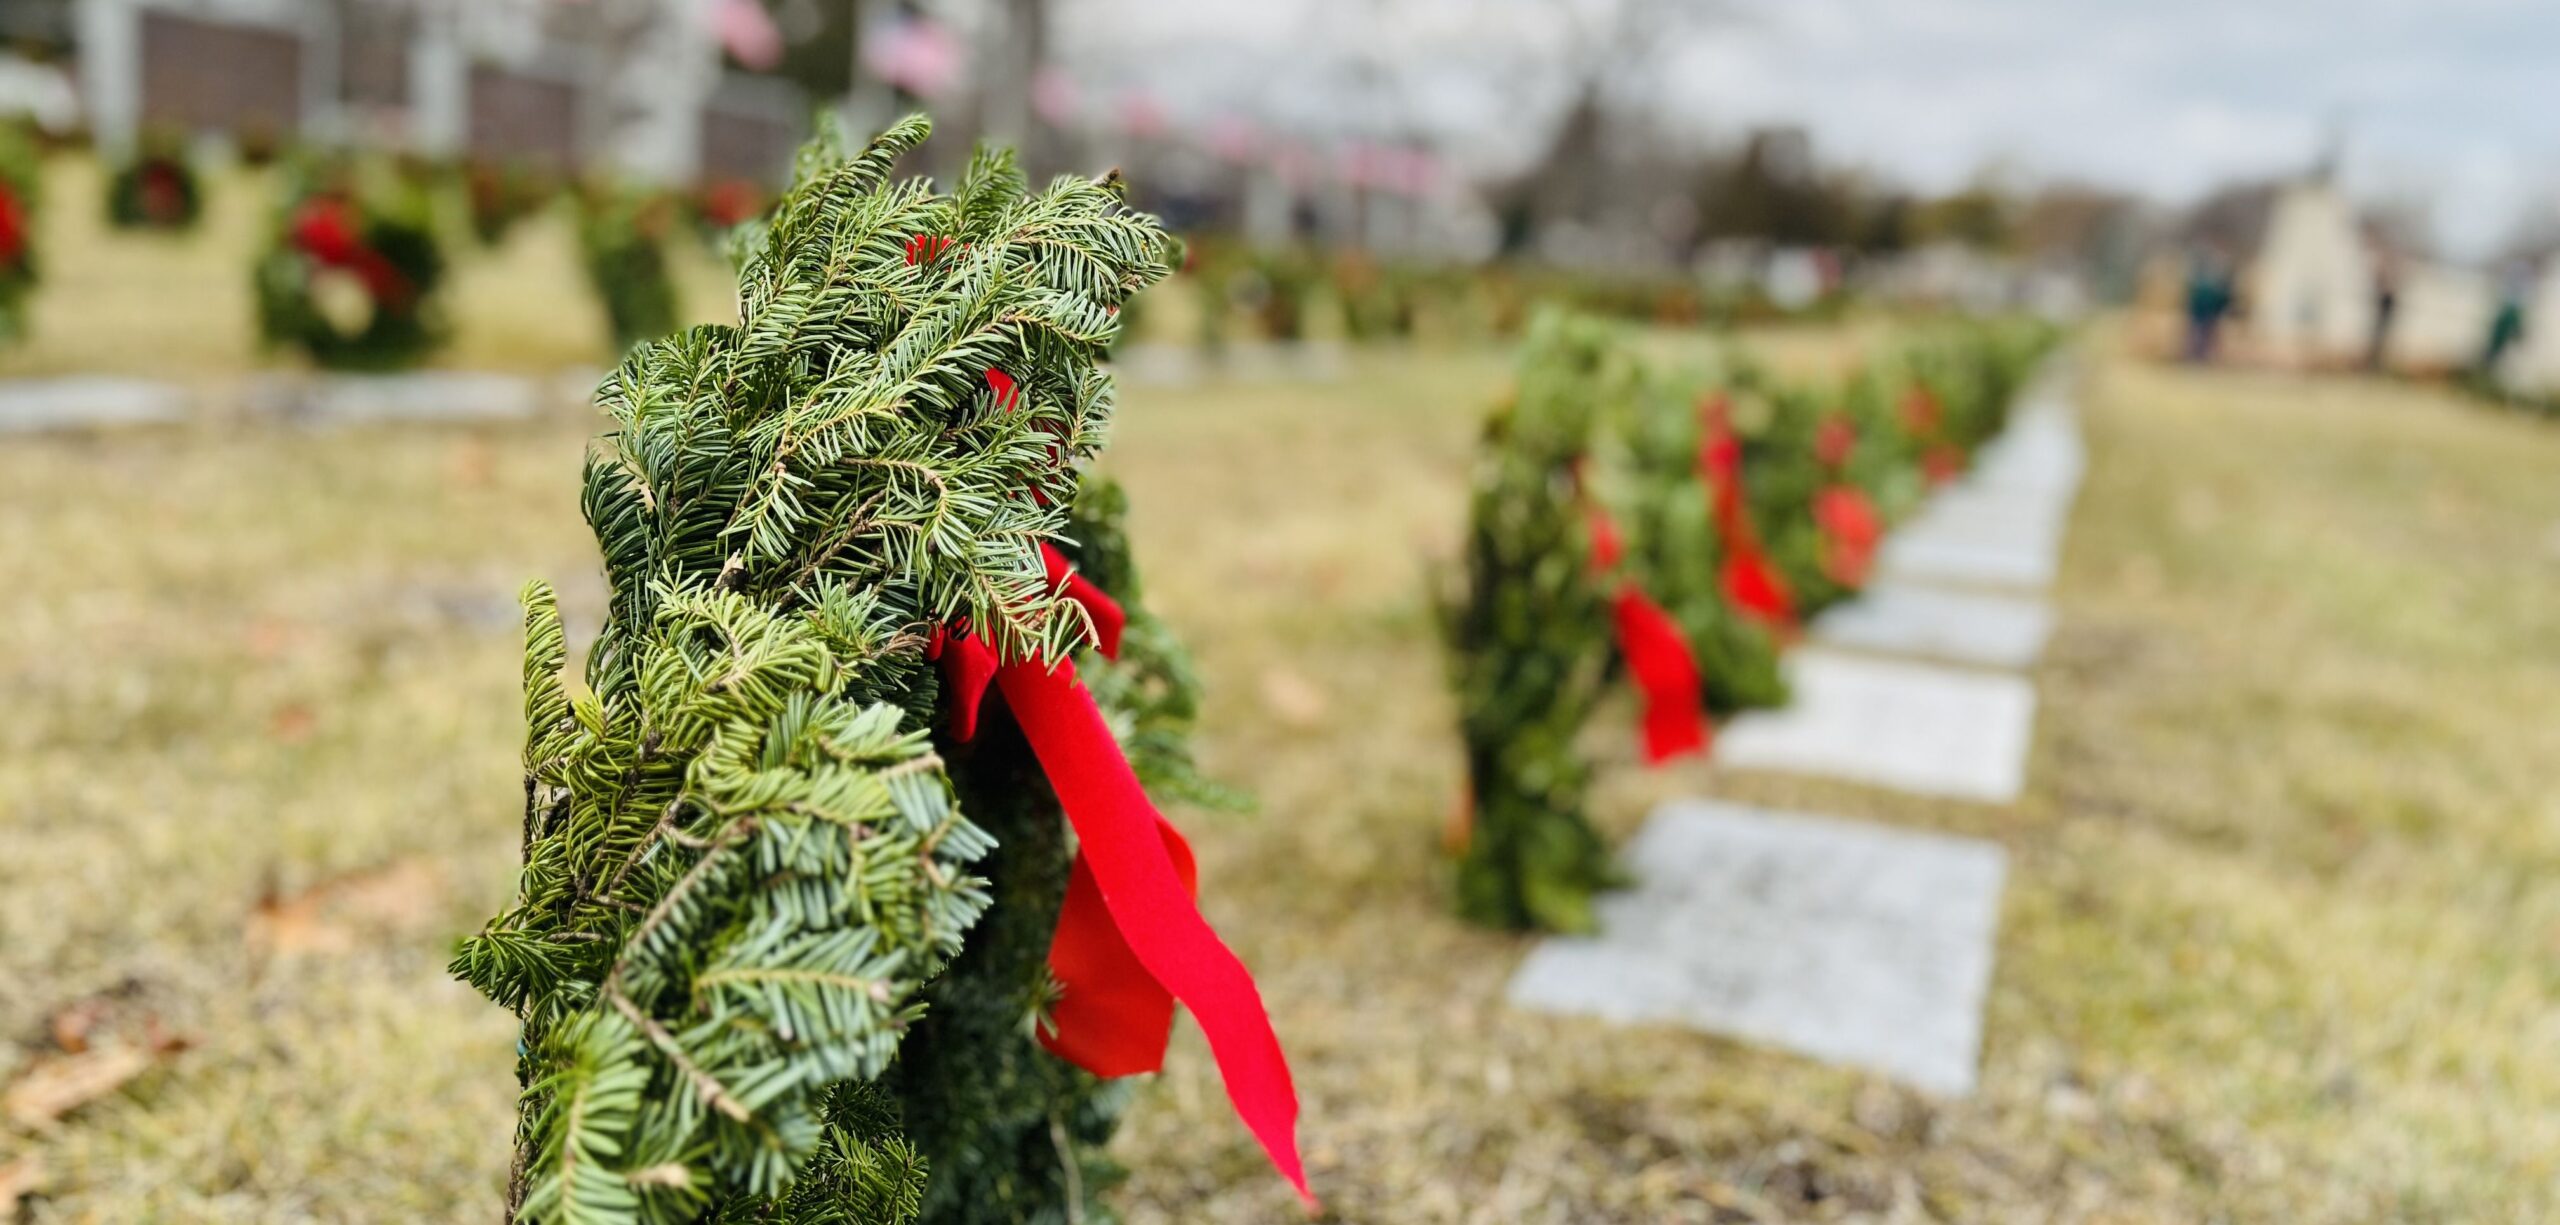 National Wreaths Across America Day 2022 - St. Clair County, MI